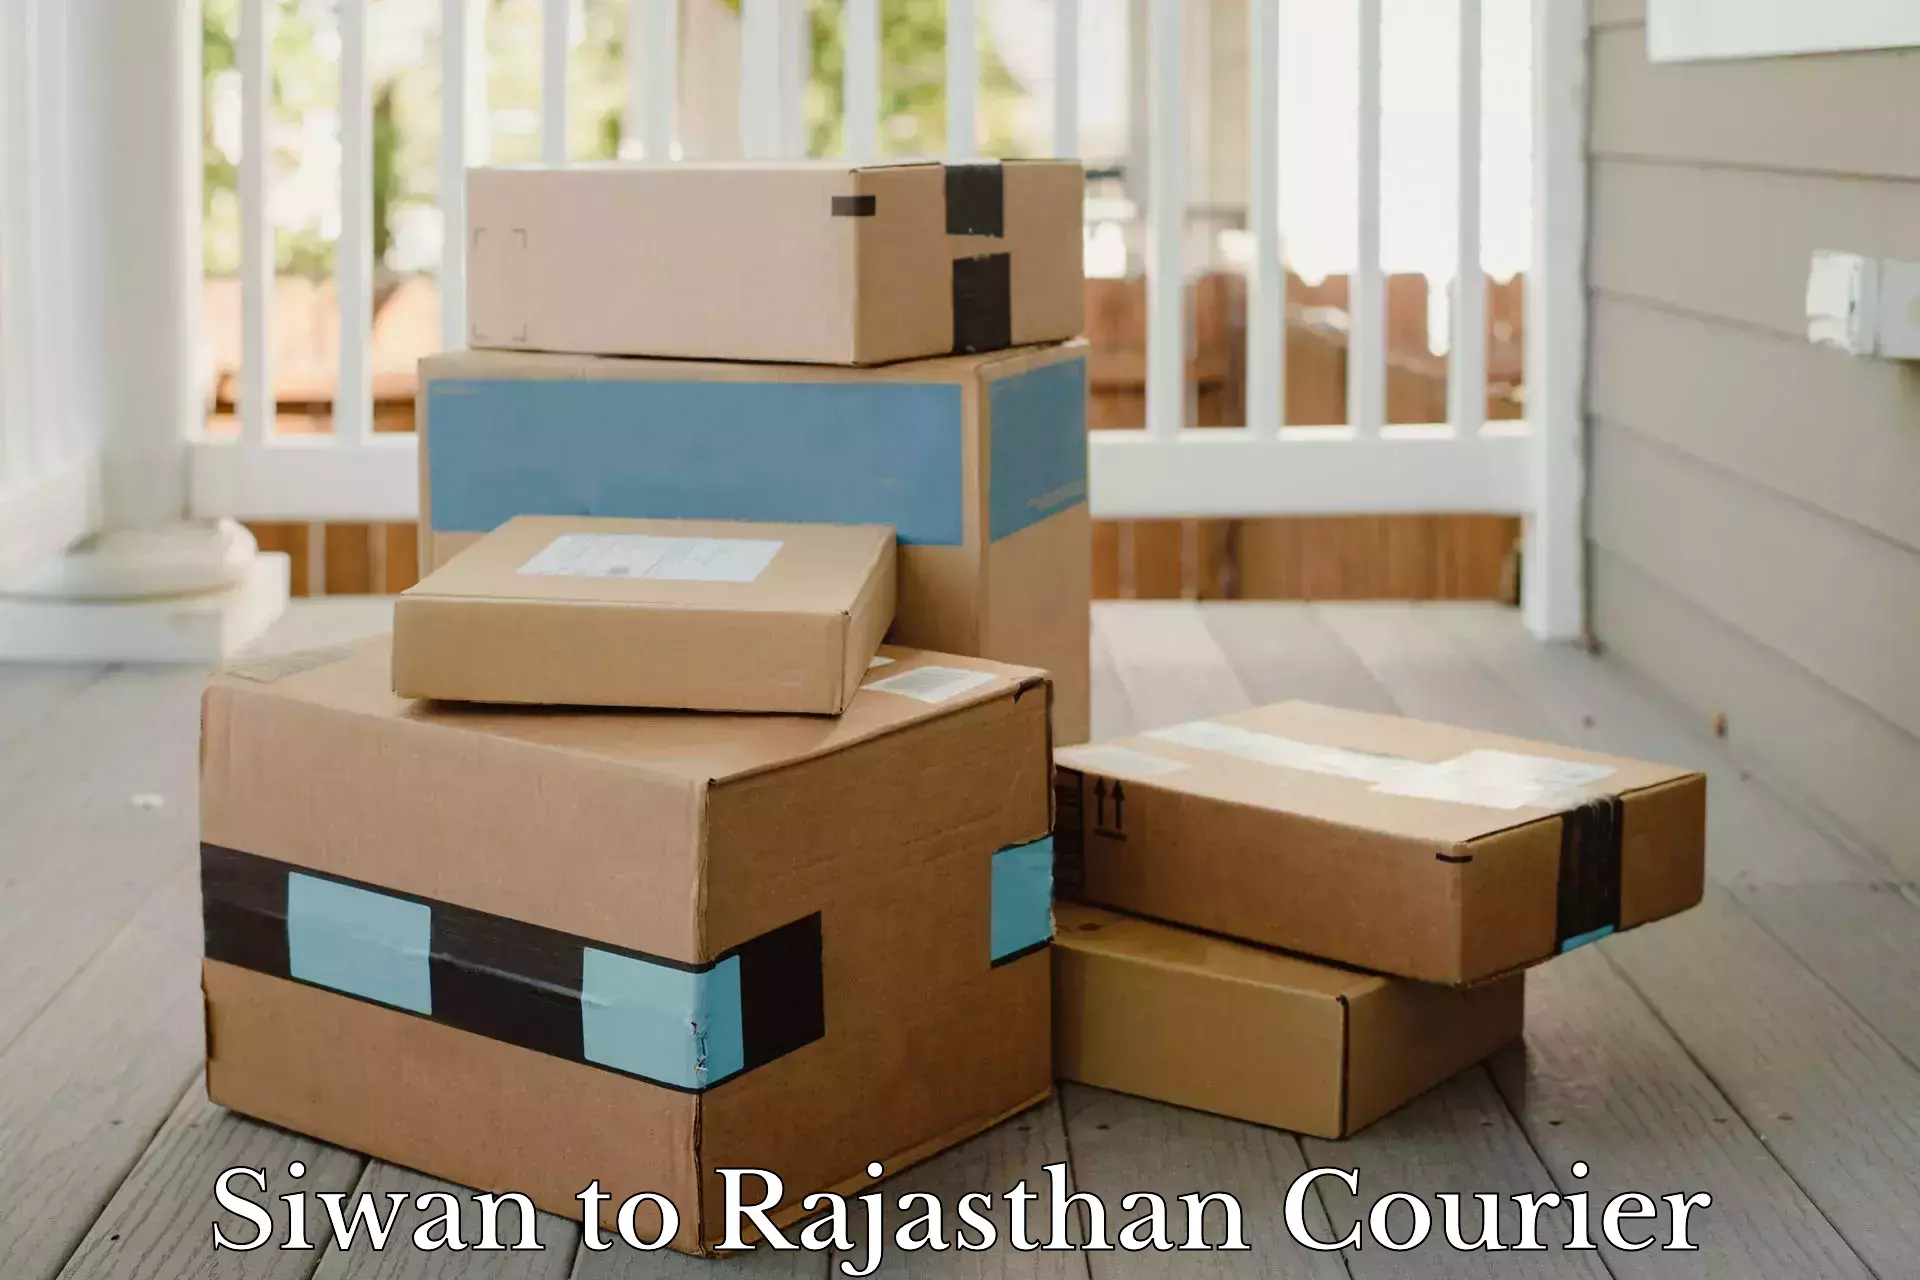 International courier networks Siwan to Rajasthan